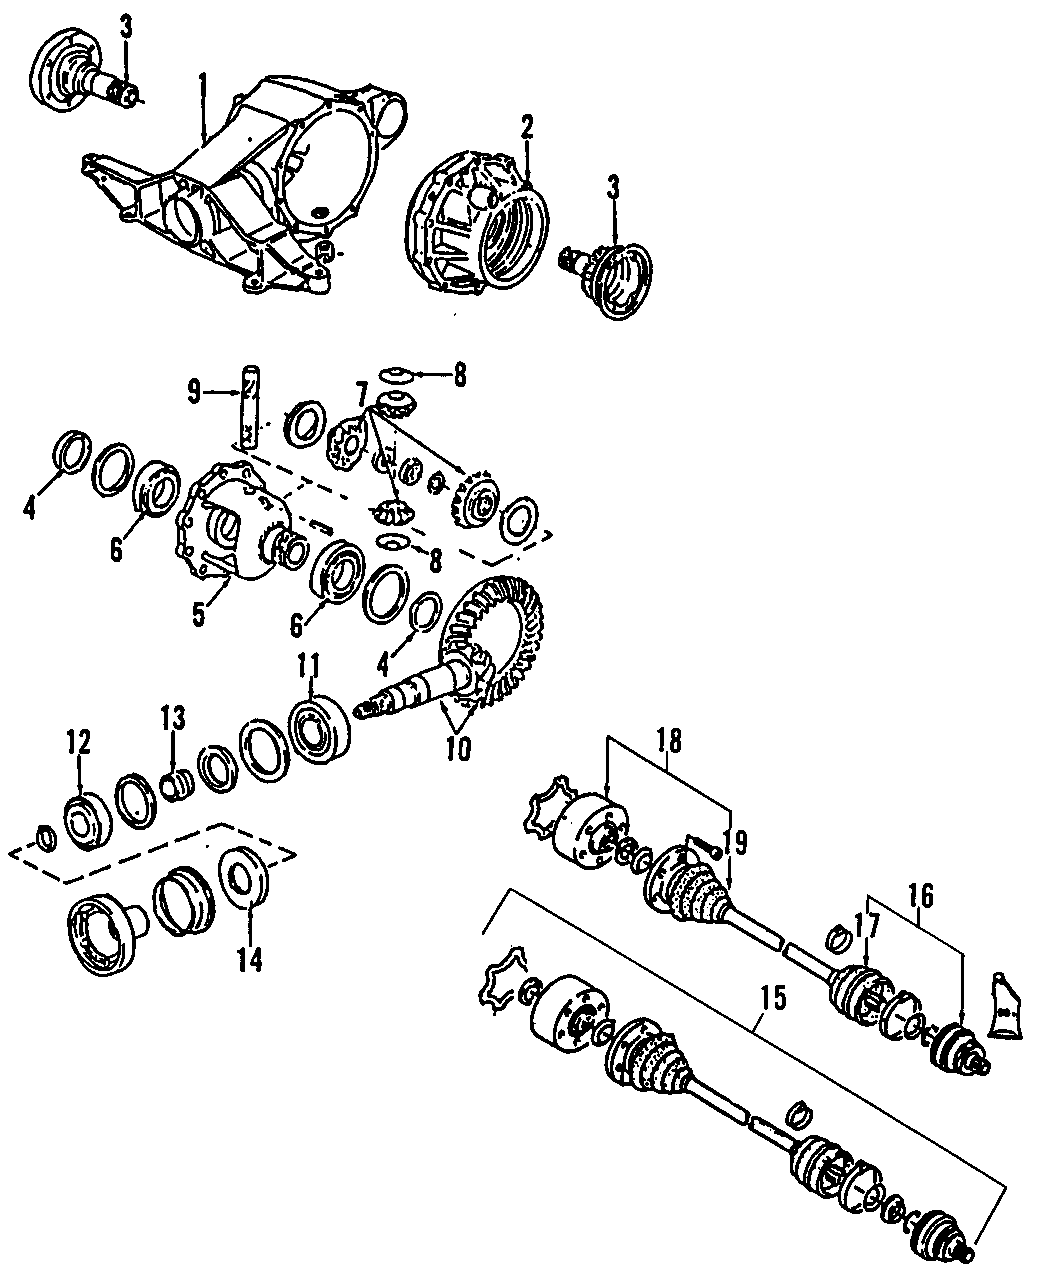 6DRIVE AXLES. REAR AXLE. AXLE SHAFTS & JOINTS. DIFFERENTIAL.https://images.simplepart.com/images/parts/motor/fullsize/F255240.png